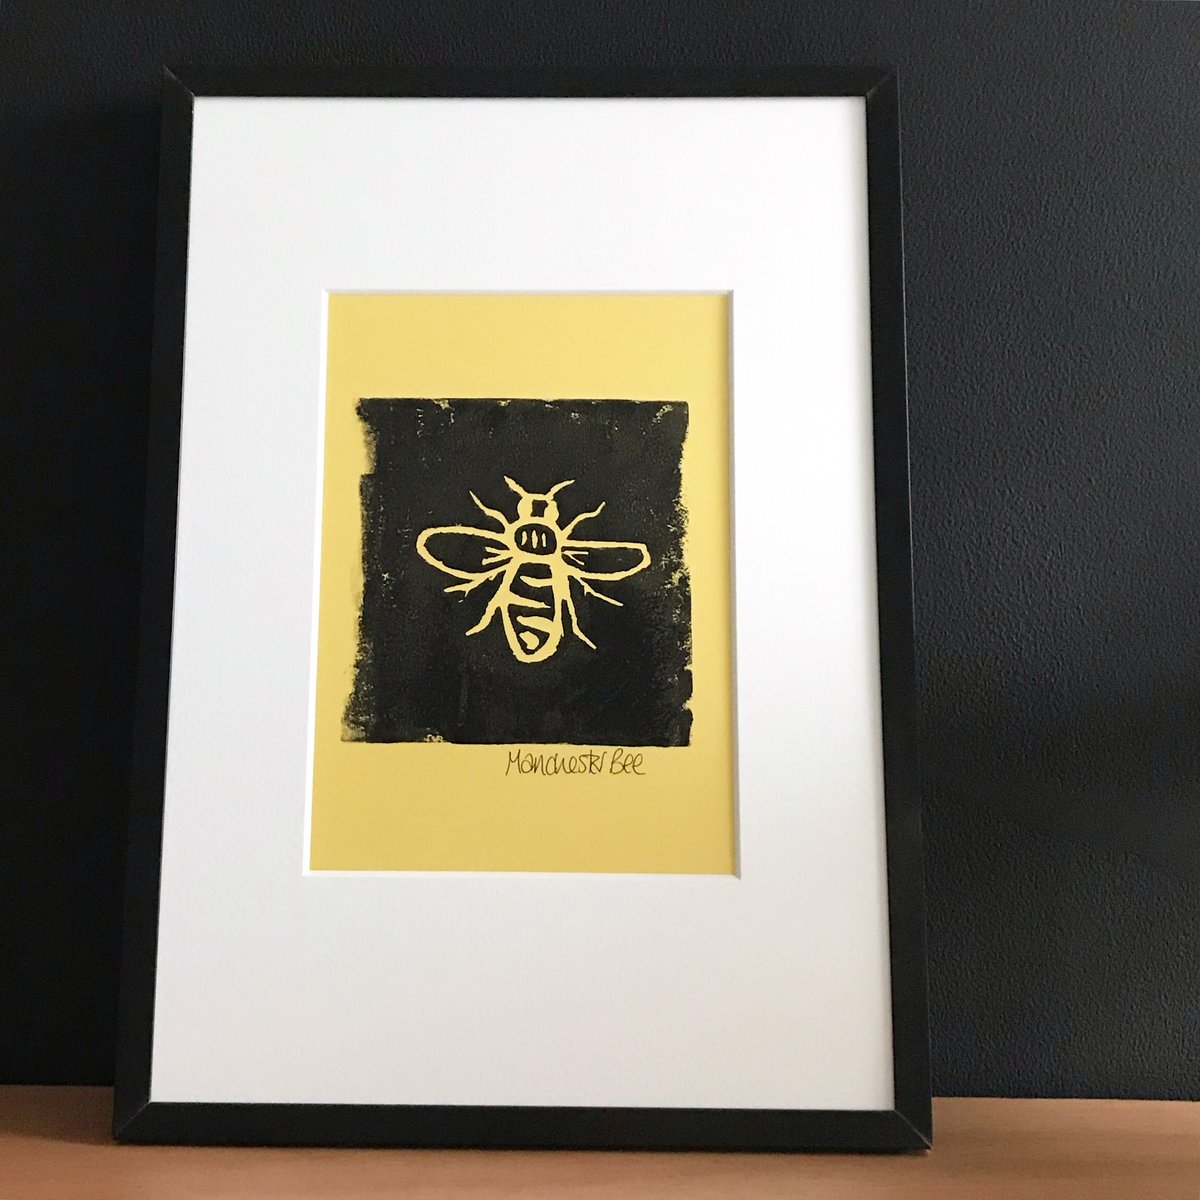 Image of Manchester Bee Lino Print - Framed